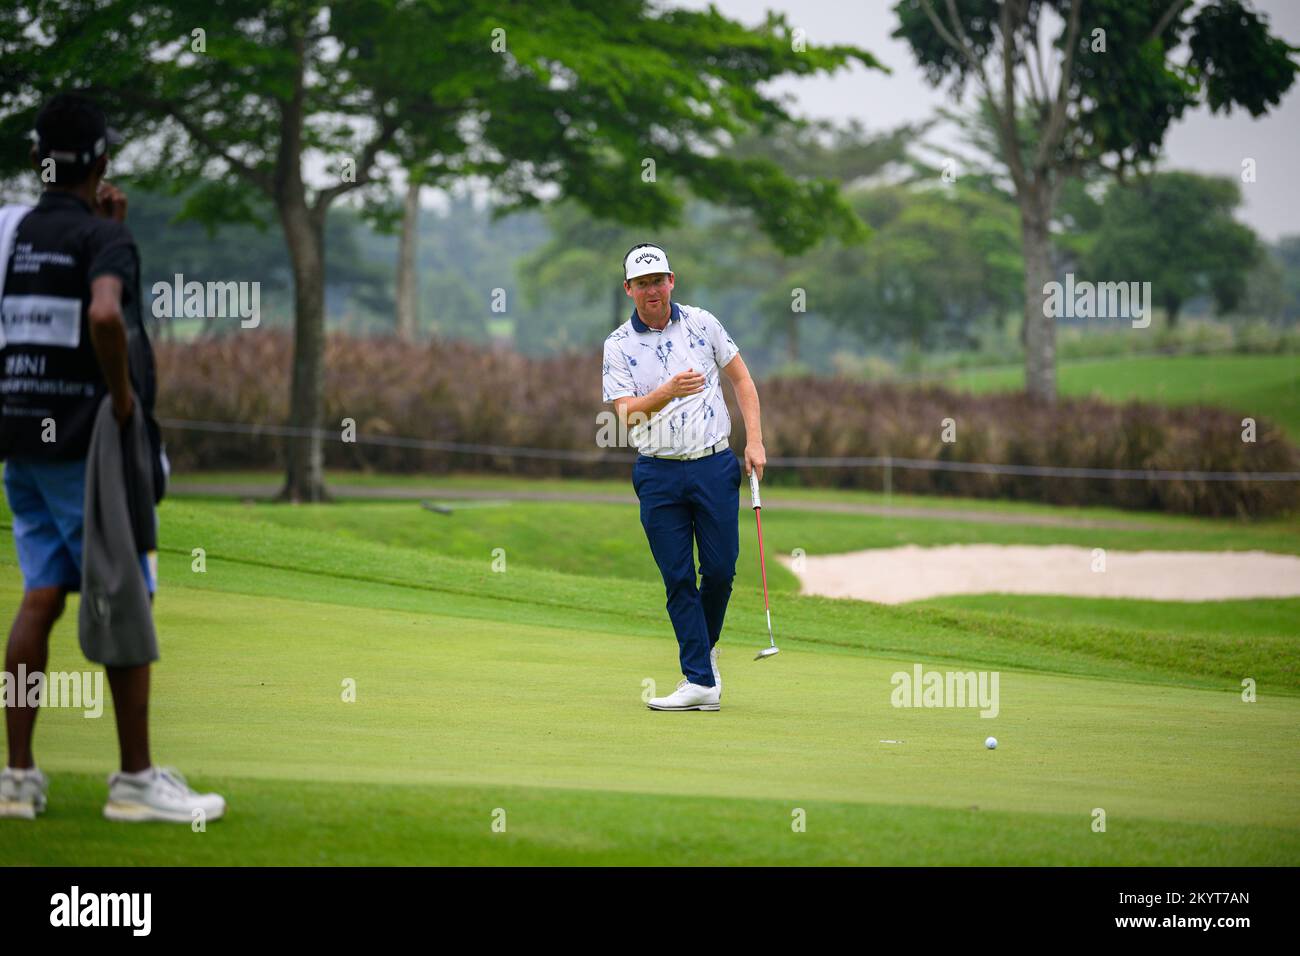 Jakarta, INDONESIA. 02nd December, 2022. Mathiam Keyser of SOUTH AFRICA putts at hole 10 during the 2nd round the BNI Indonesian Masters at Royale Jakarta Golf Club in Jakarta, INDONESIA. Keyser would close out with a four-under 68 to take a share of the clubhouse lead on 11-under par. Credit: Jason Butler/Alamy Live News. Stock Photo